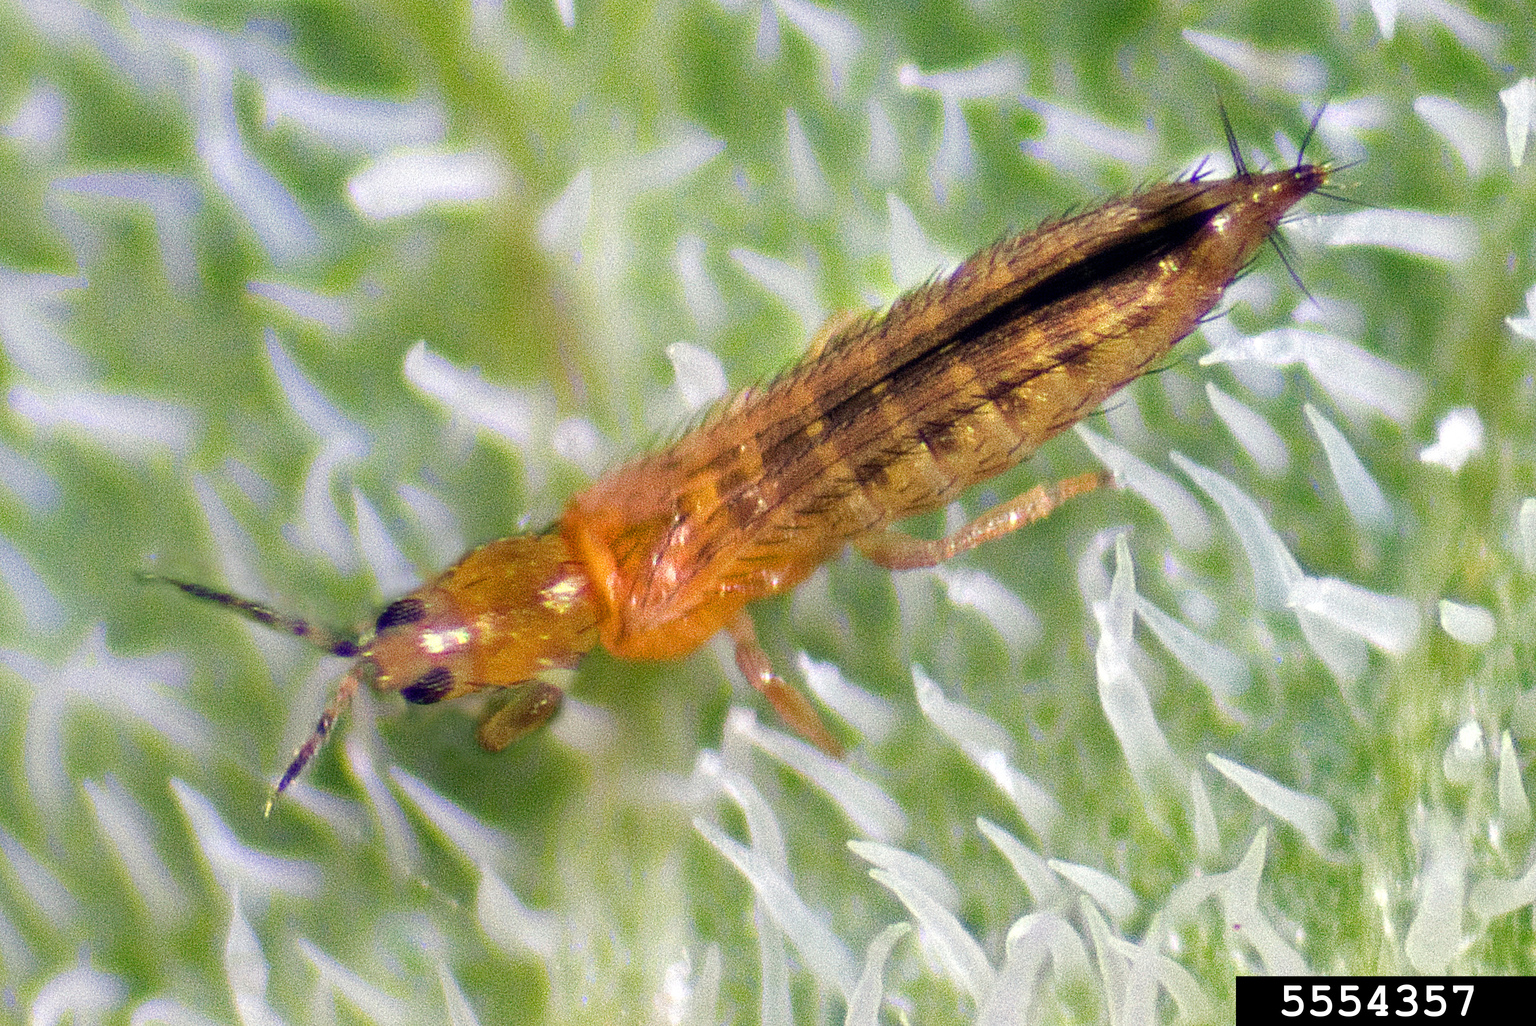 Integrated pest management options for the western flower thrips